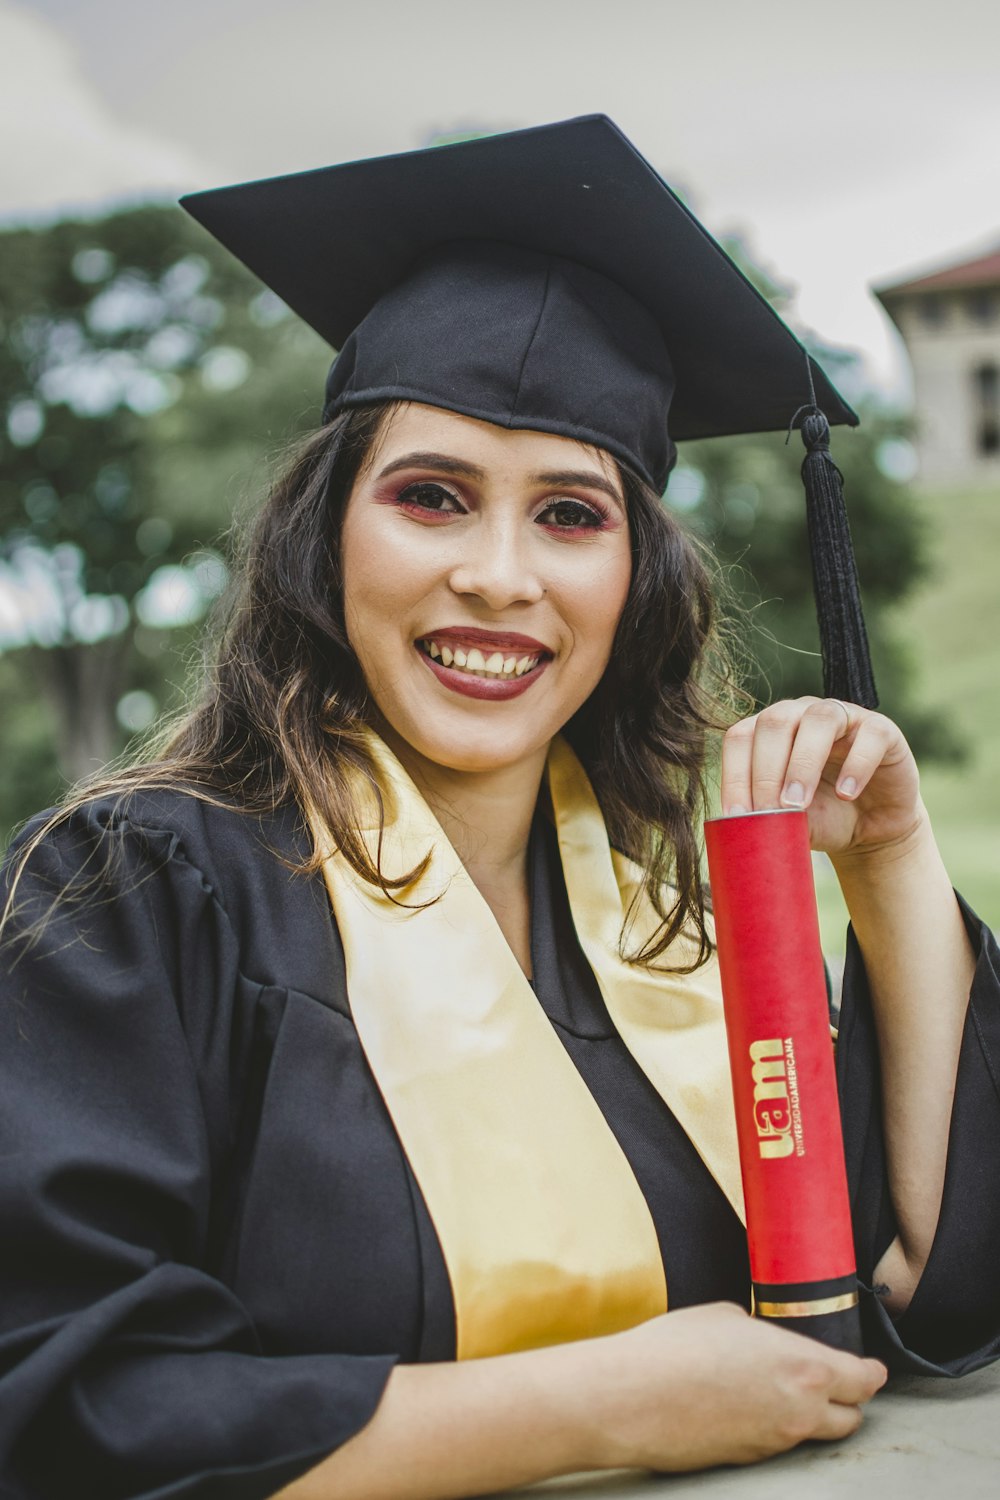 woman wearing black graduation gown holding red tube